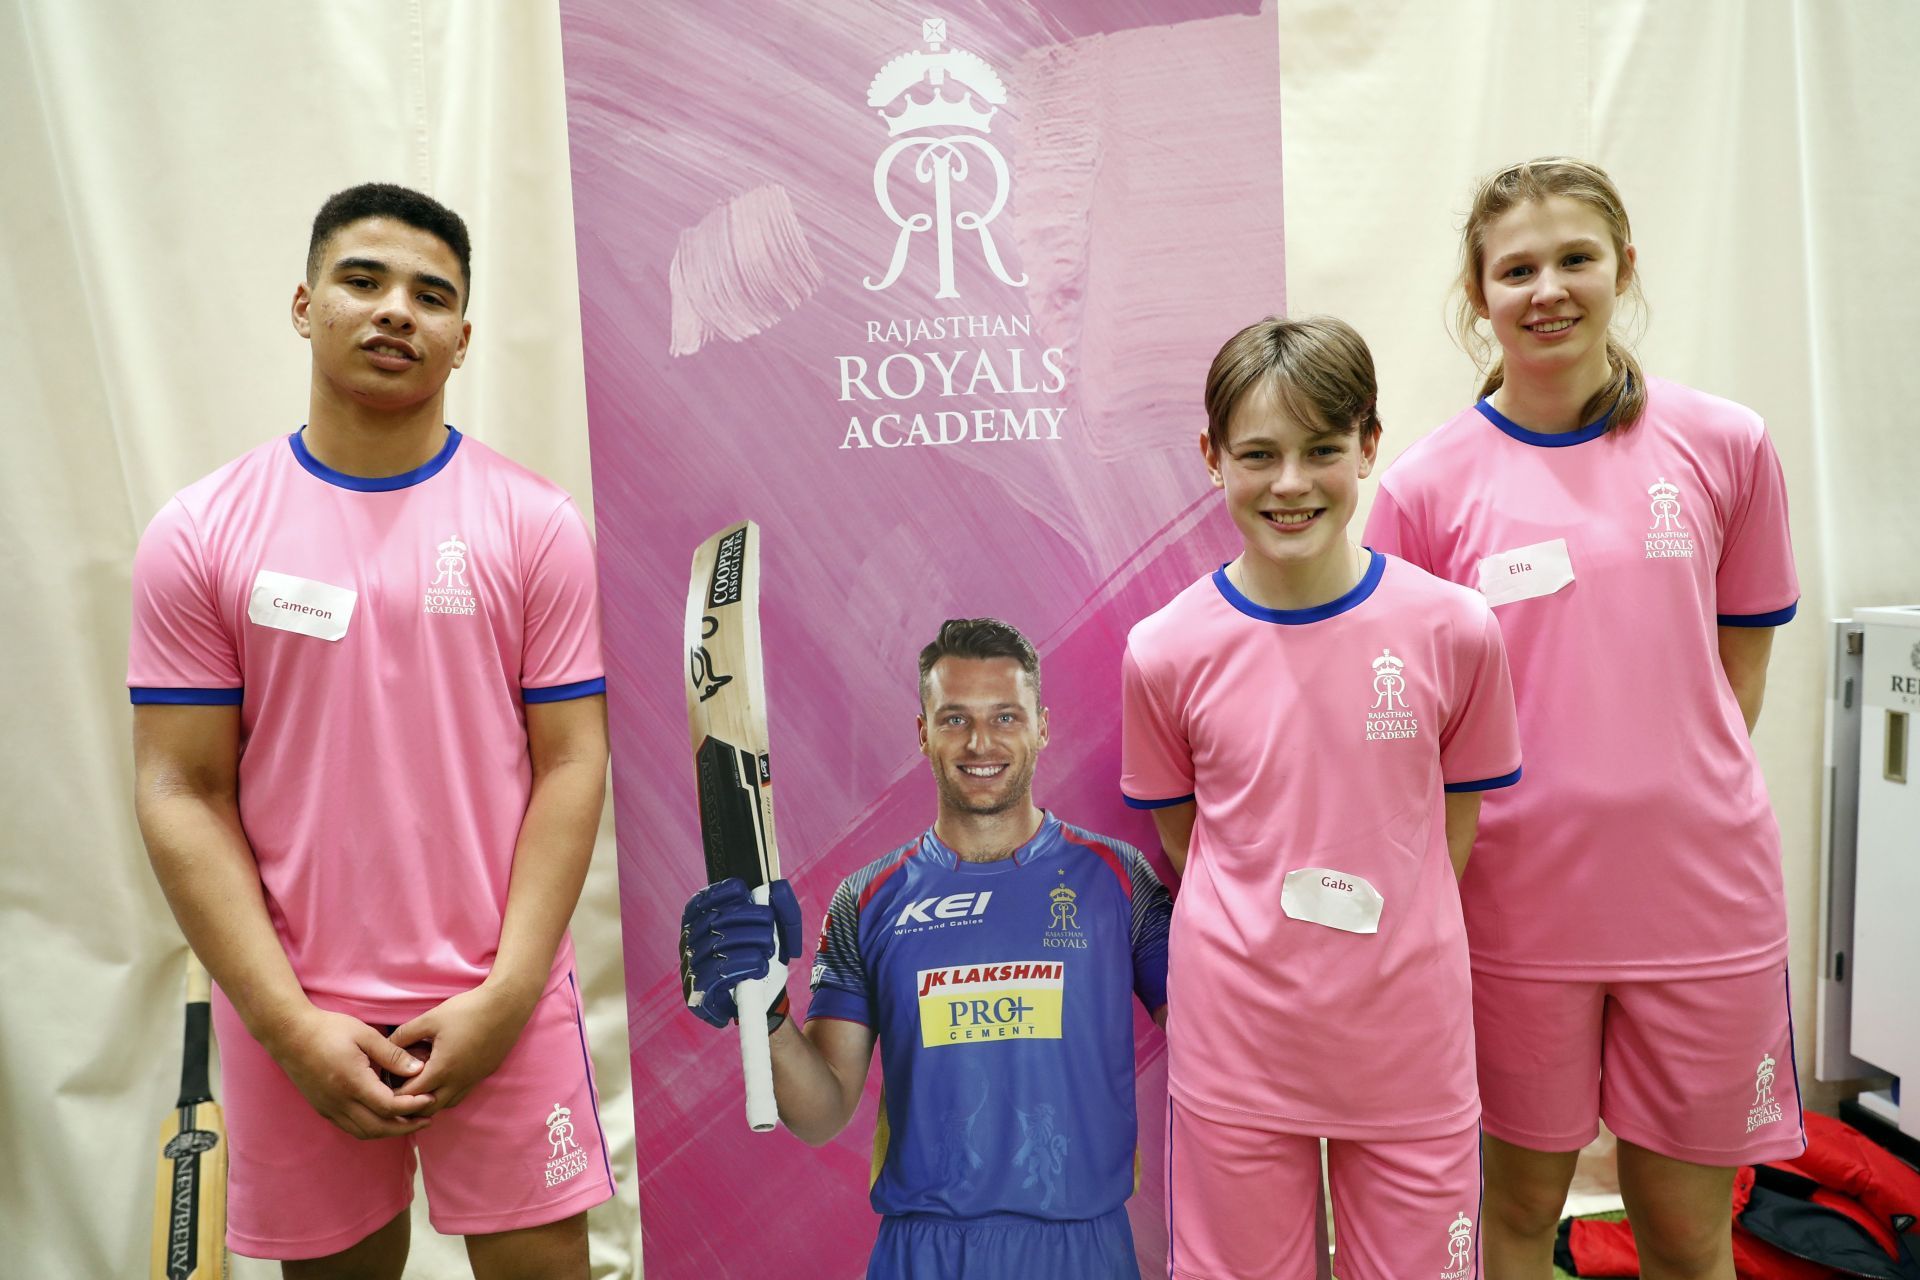 Rajasthan Royals UK Academy Launch